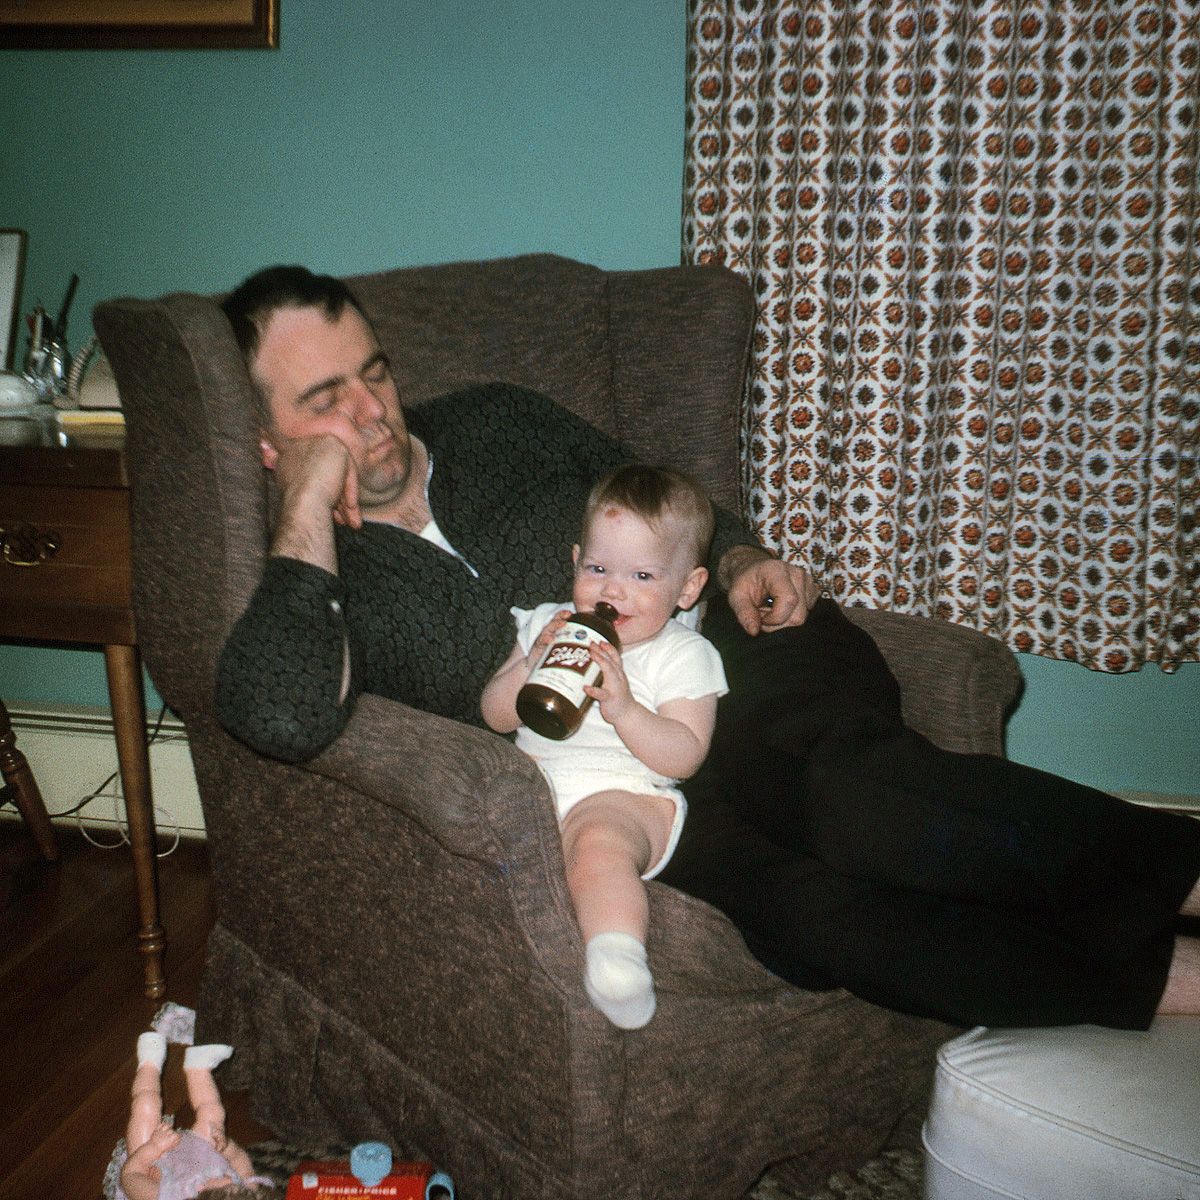 Remember the baby in Apple of His Eye? Here she is again, seemingly about to ingest something not quite so healthy, this time courtesy her dad. Another one of my friend's family photos that I'm scanning for her, posted with her permission. Again a 126 Instamatic Kodachrome slide. View full size.